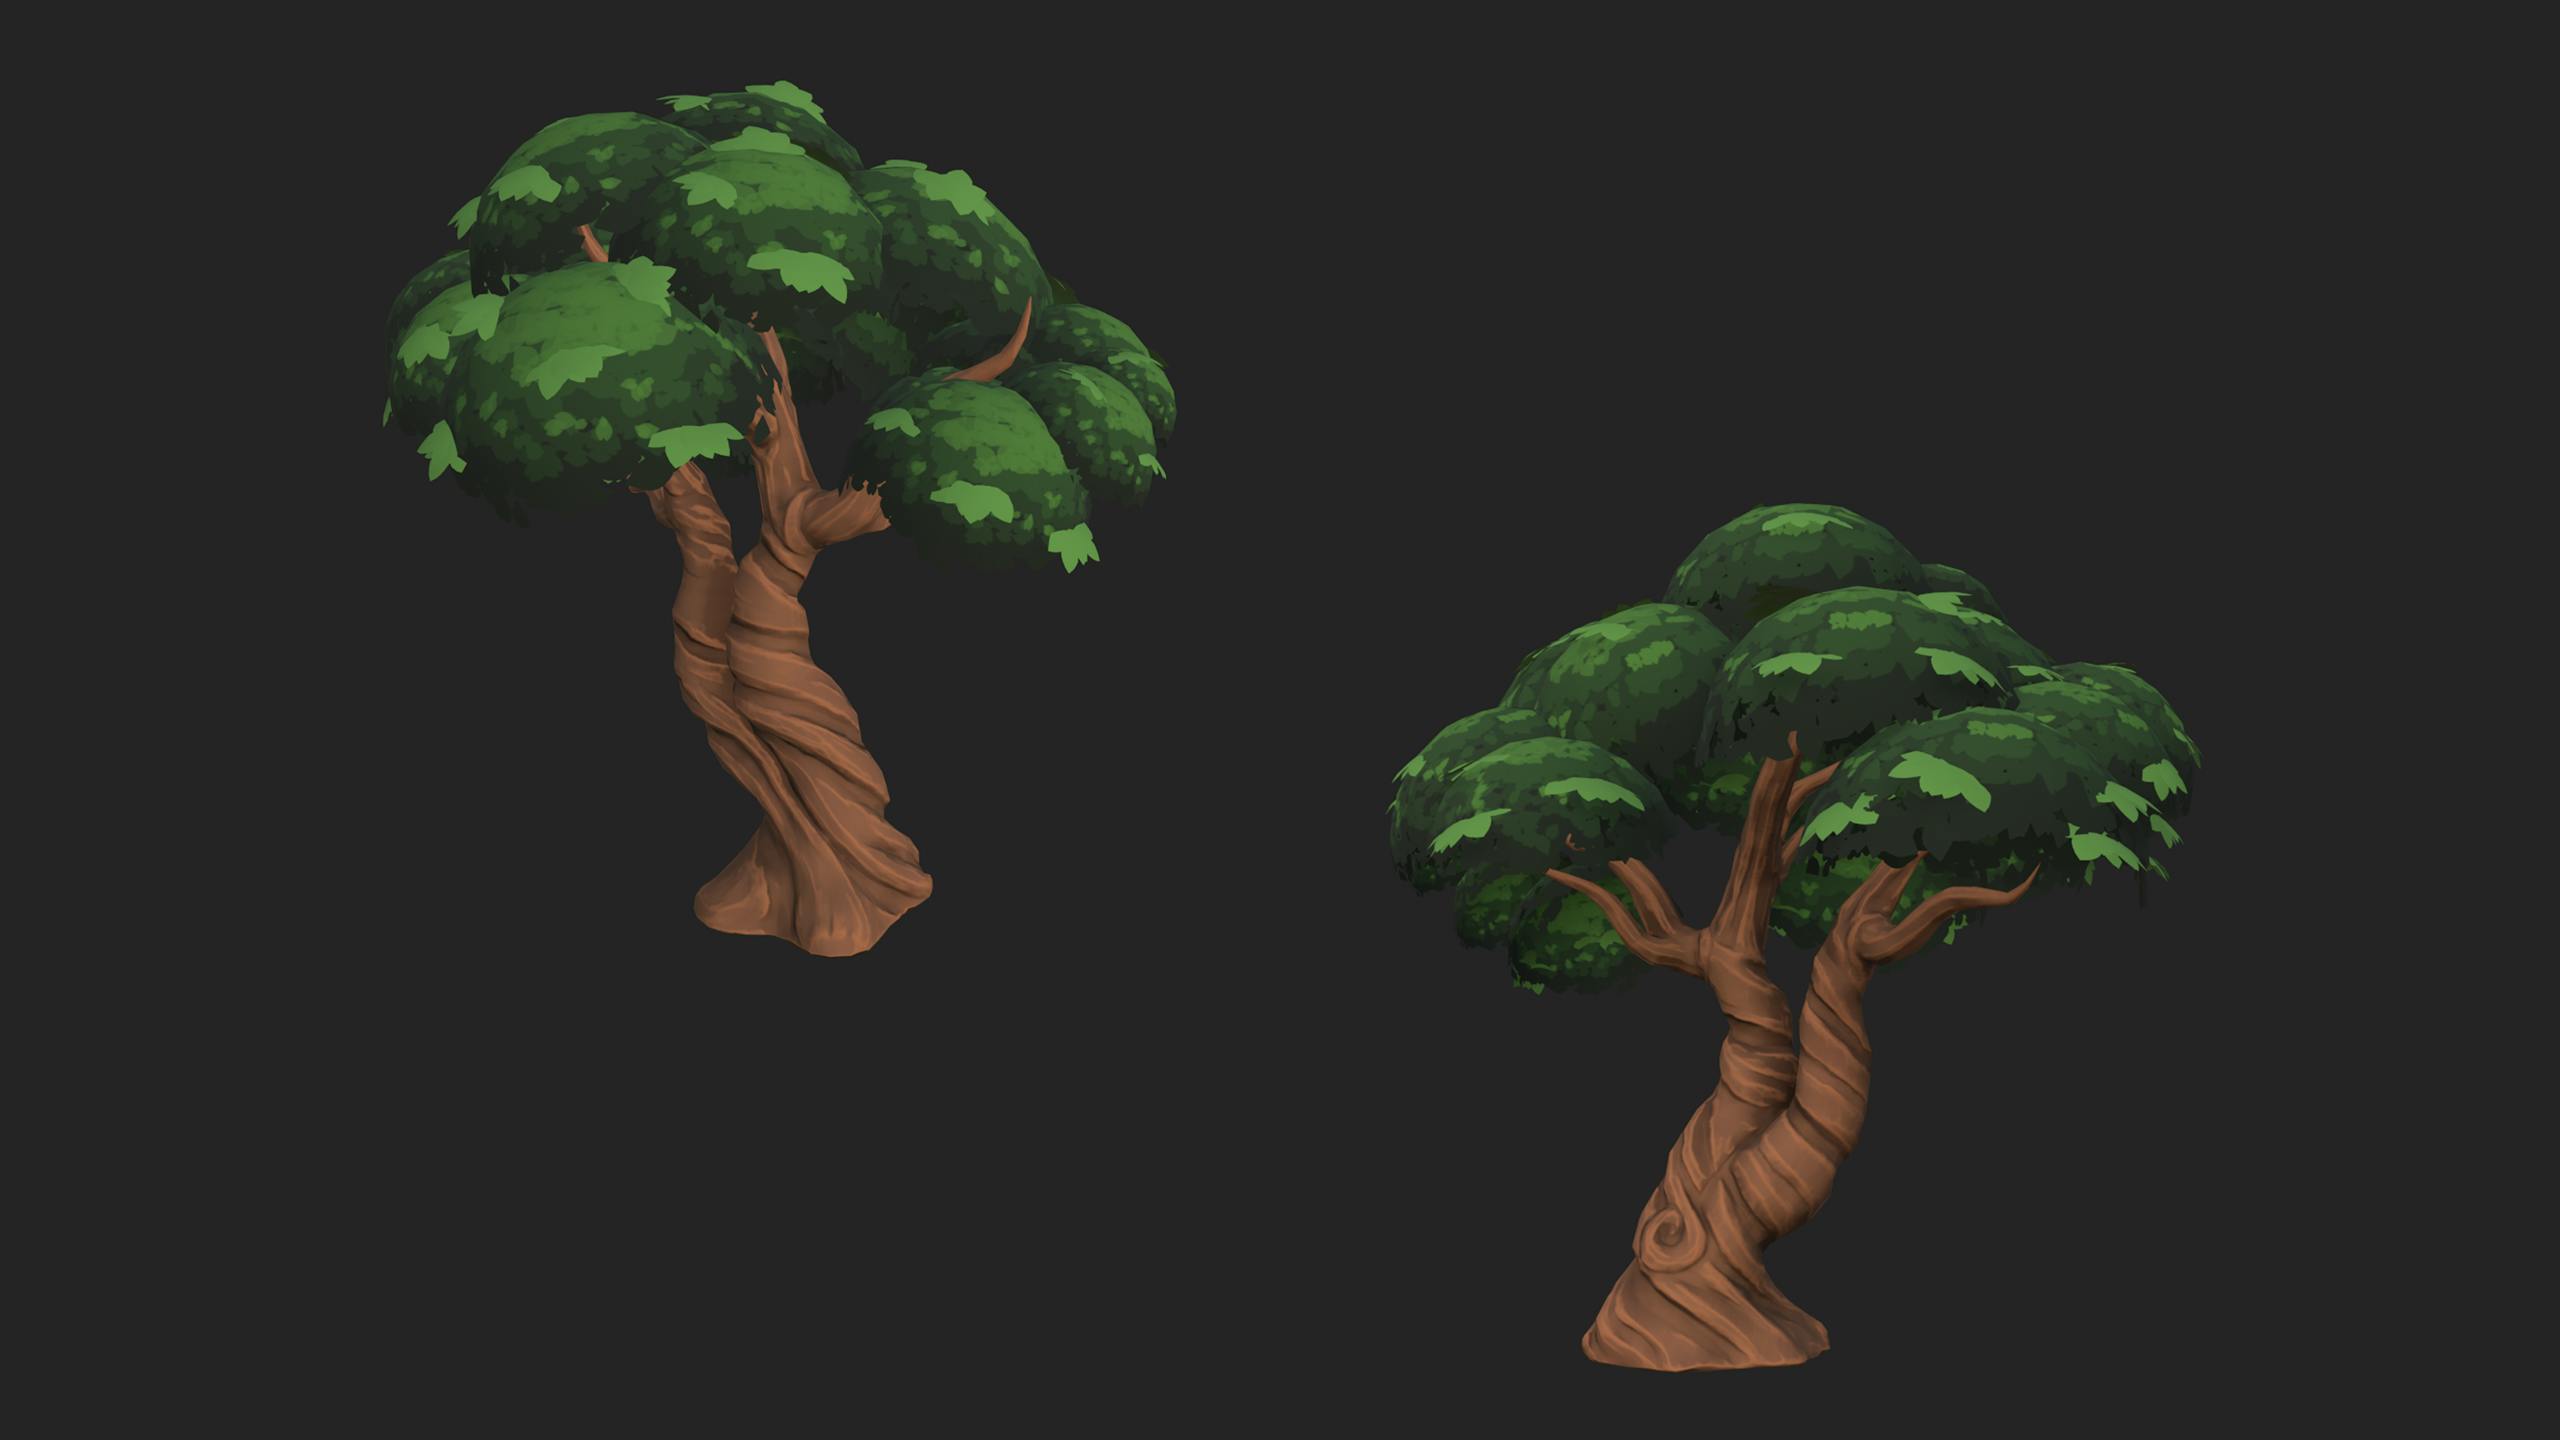 Two screenshots of a 3D, textured model of a tree. The tree is shaped like an oak tree, with a sturdy brown trunk covered in swirling bark, and a large covering of green leaves at the top.  